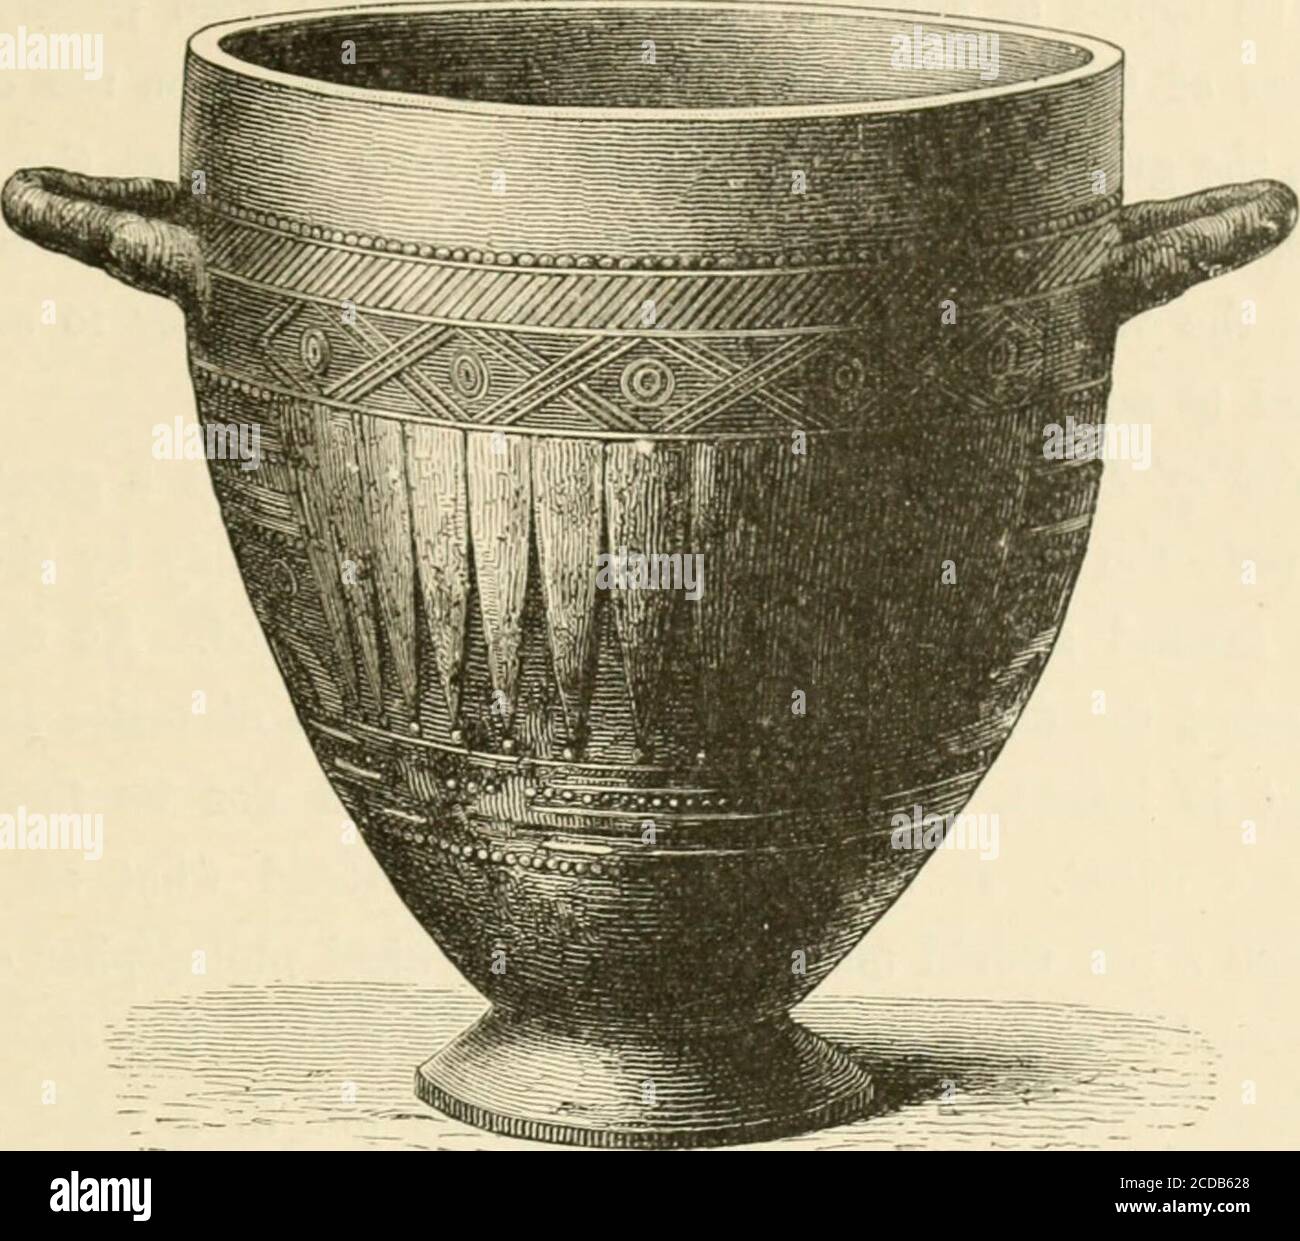 Pottery and porcelain, from early down to the Philadelphia exhibition of 1876 . Fig. ^i.—Etruscan Vase. adoni glorify it, the Greek man be said—using expressiveAmerican phrase—to liave